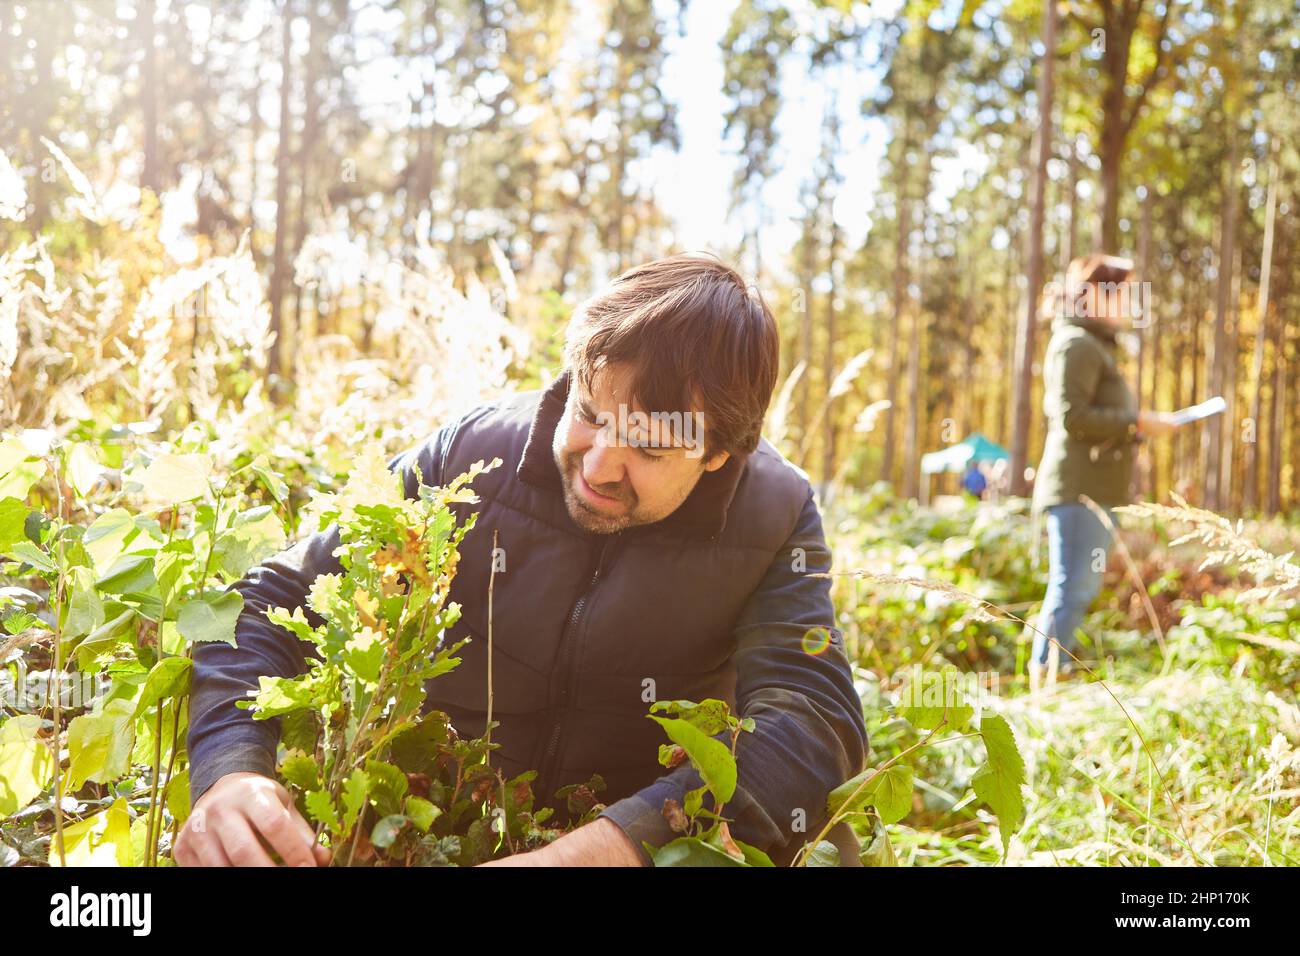 Forester or conservationist plants an oak tree in the forest for sustainability and climate protection Stock Photo